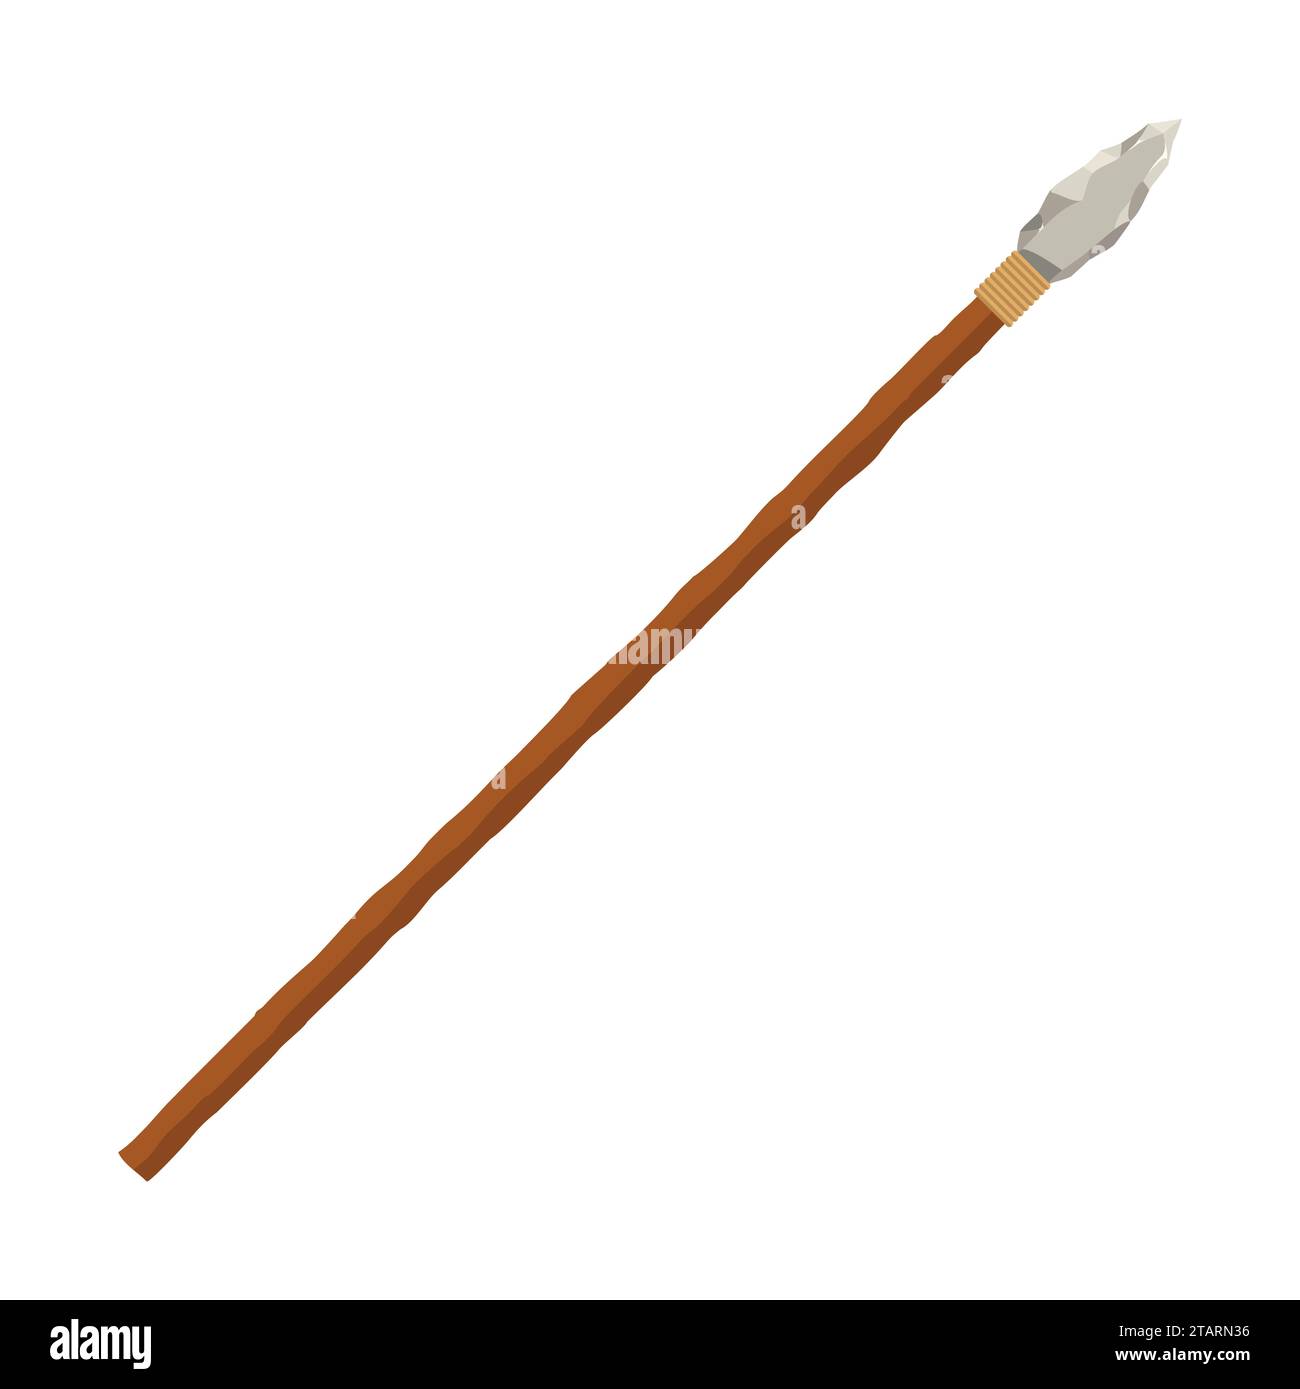 Spear isolated on white background. Hunting and military weapon prehistoric man. Primitive culture tool in flat style. Vector illustration. Stock Vector